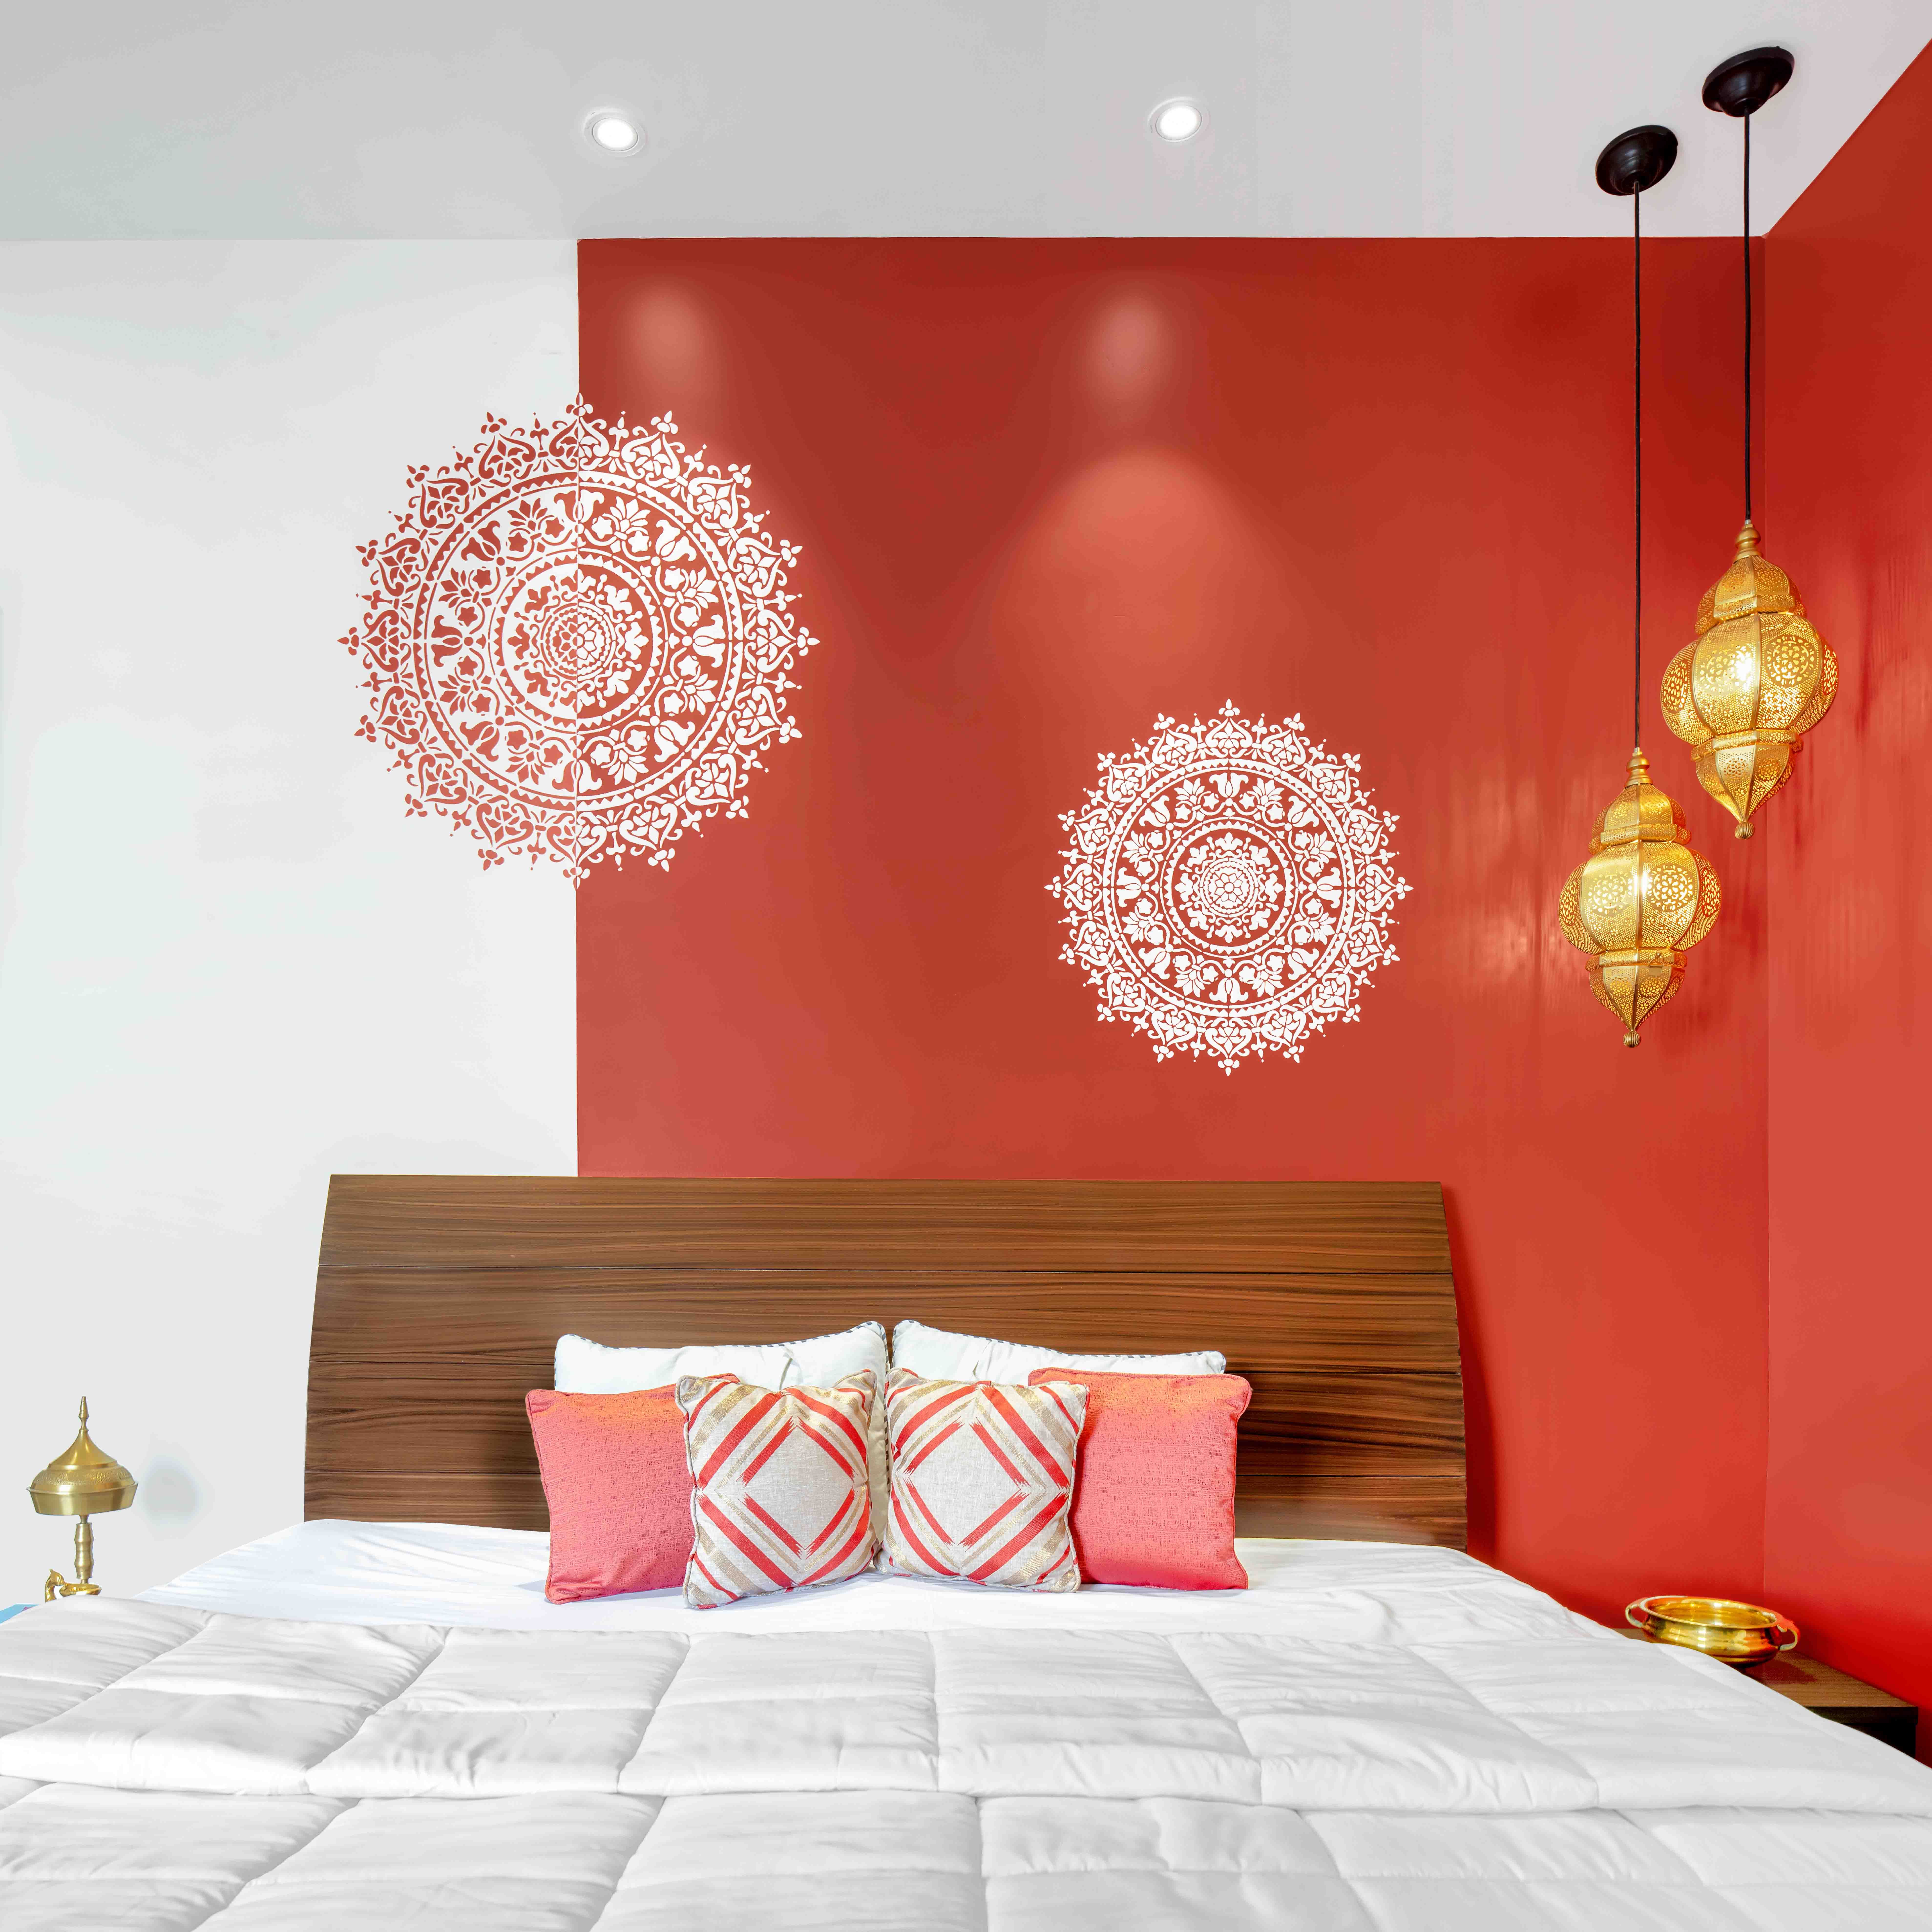 8 Dreamy Bedroom Paint Colors To Choose This Season – Inspirations |  Essential Home